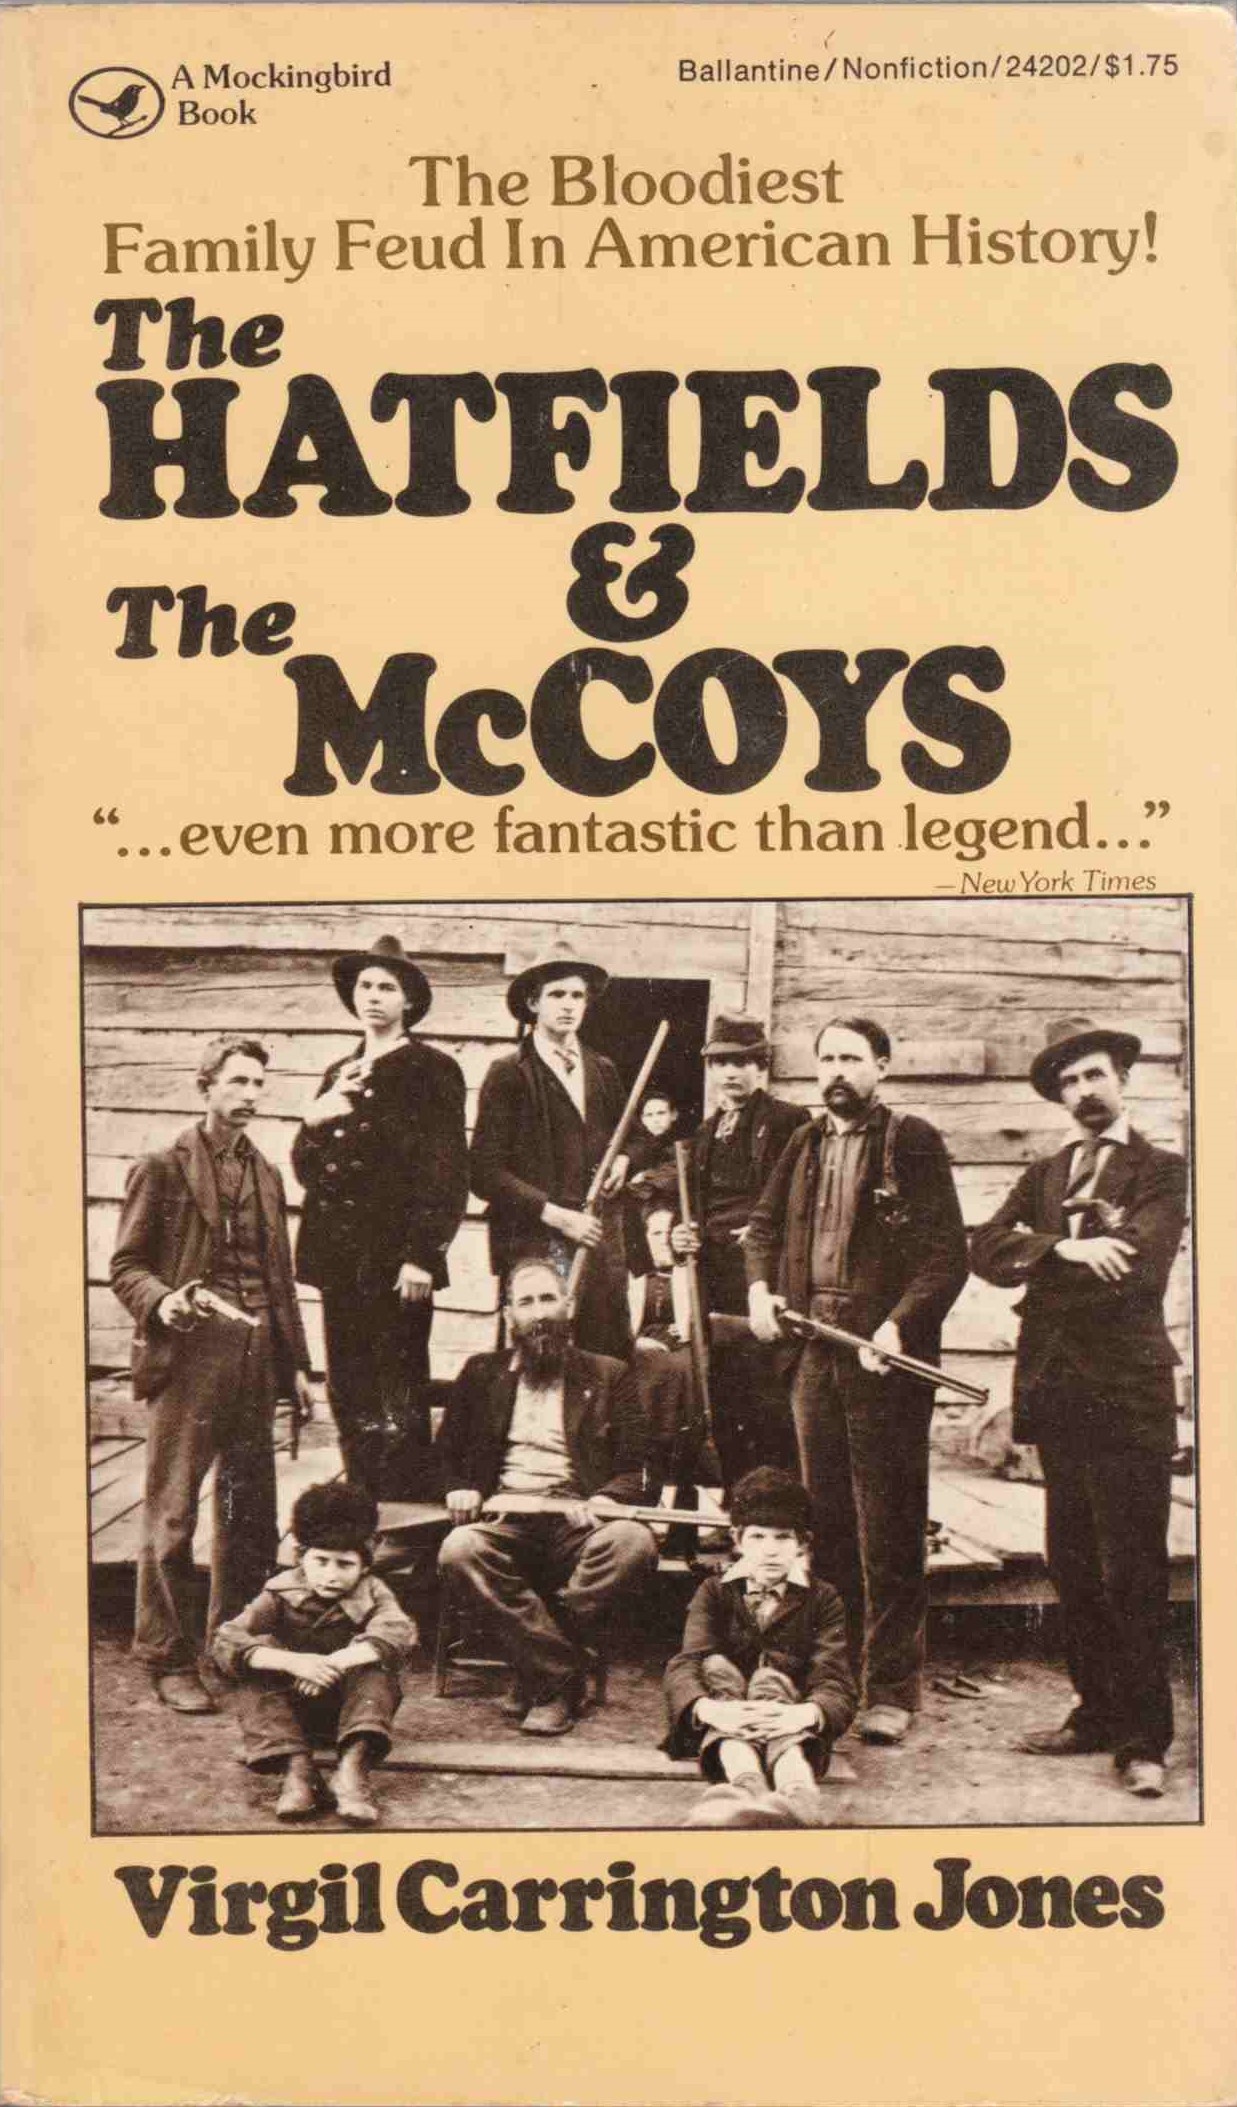 The Hatfields and the McCoys (image)